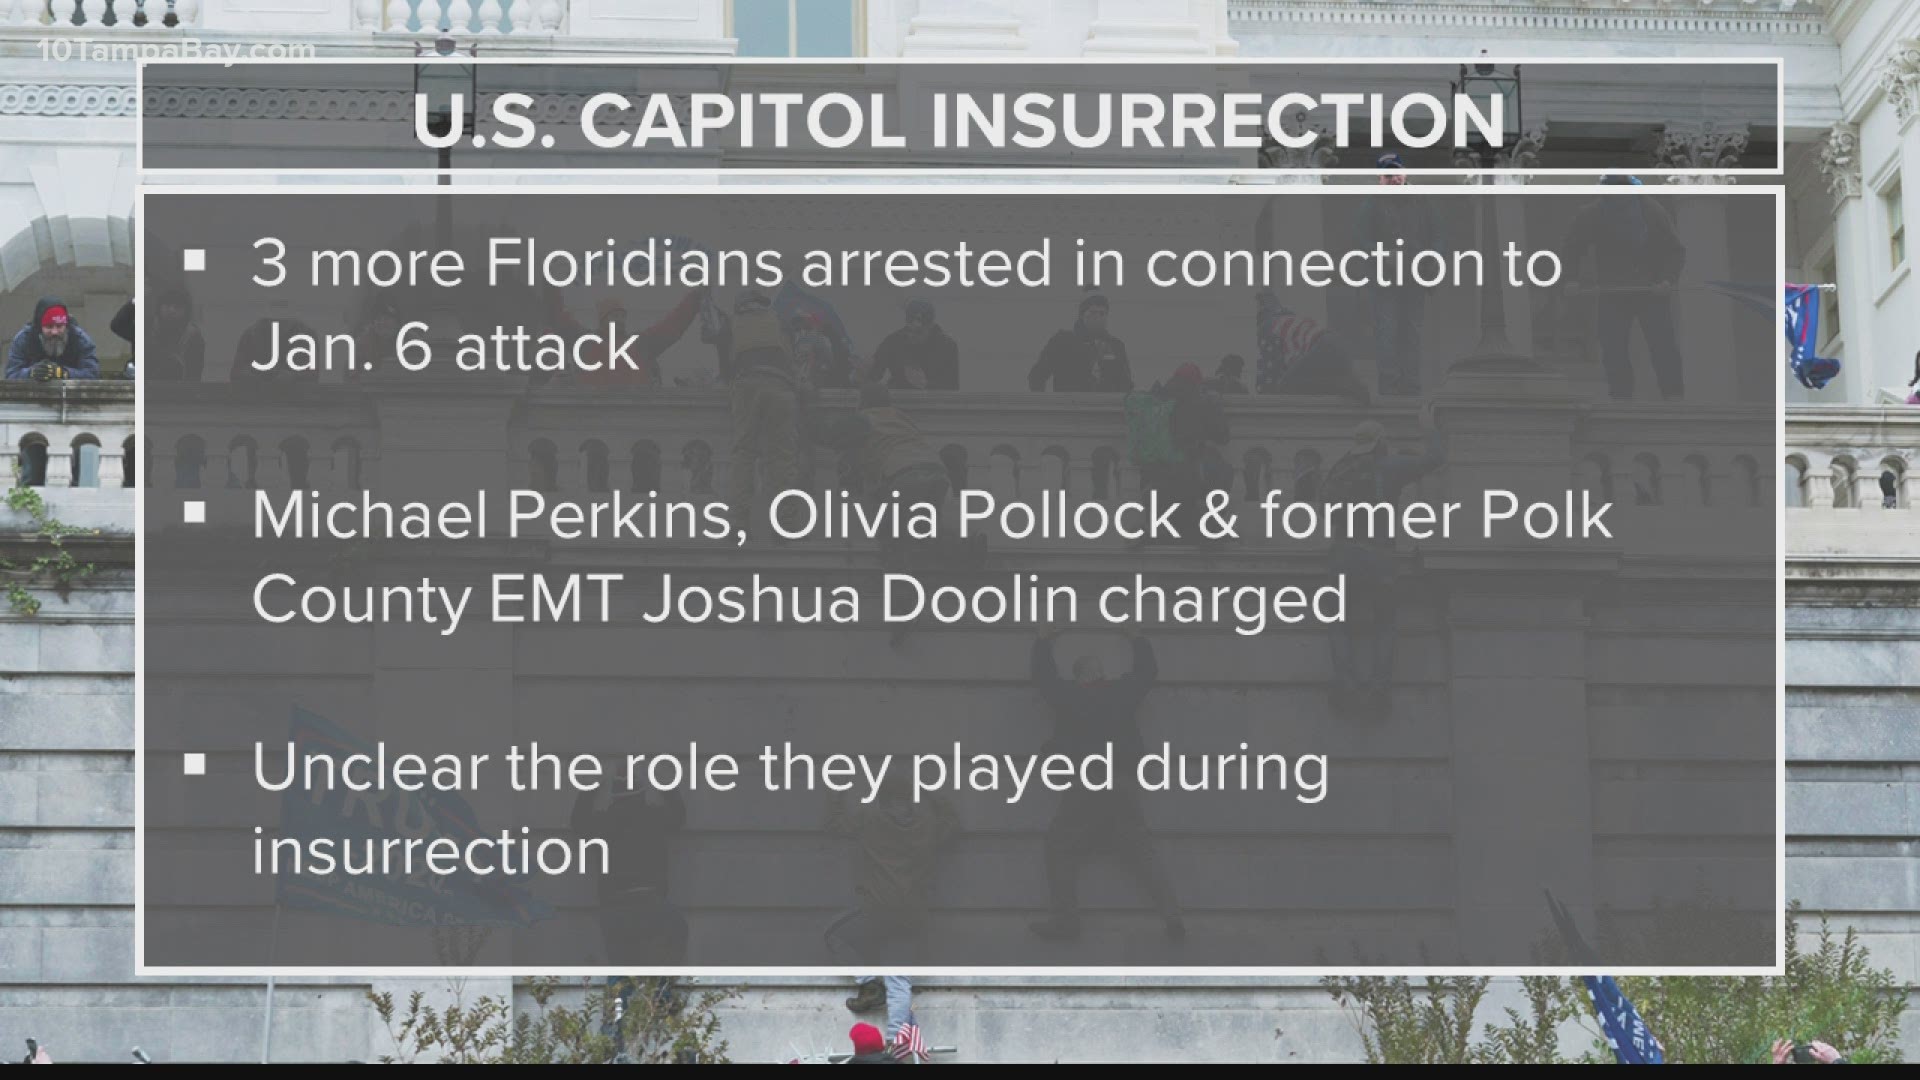 It's unclear what role the trio played during the Jan. 6 attack.